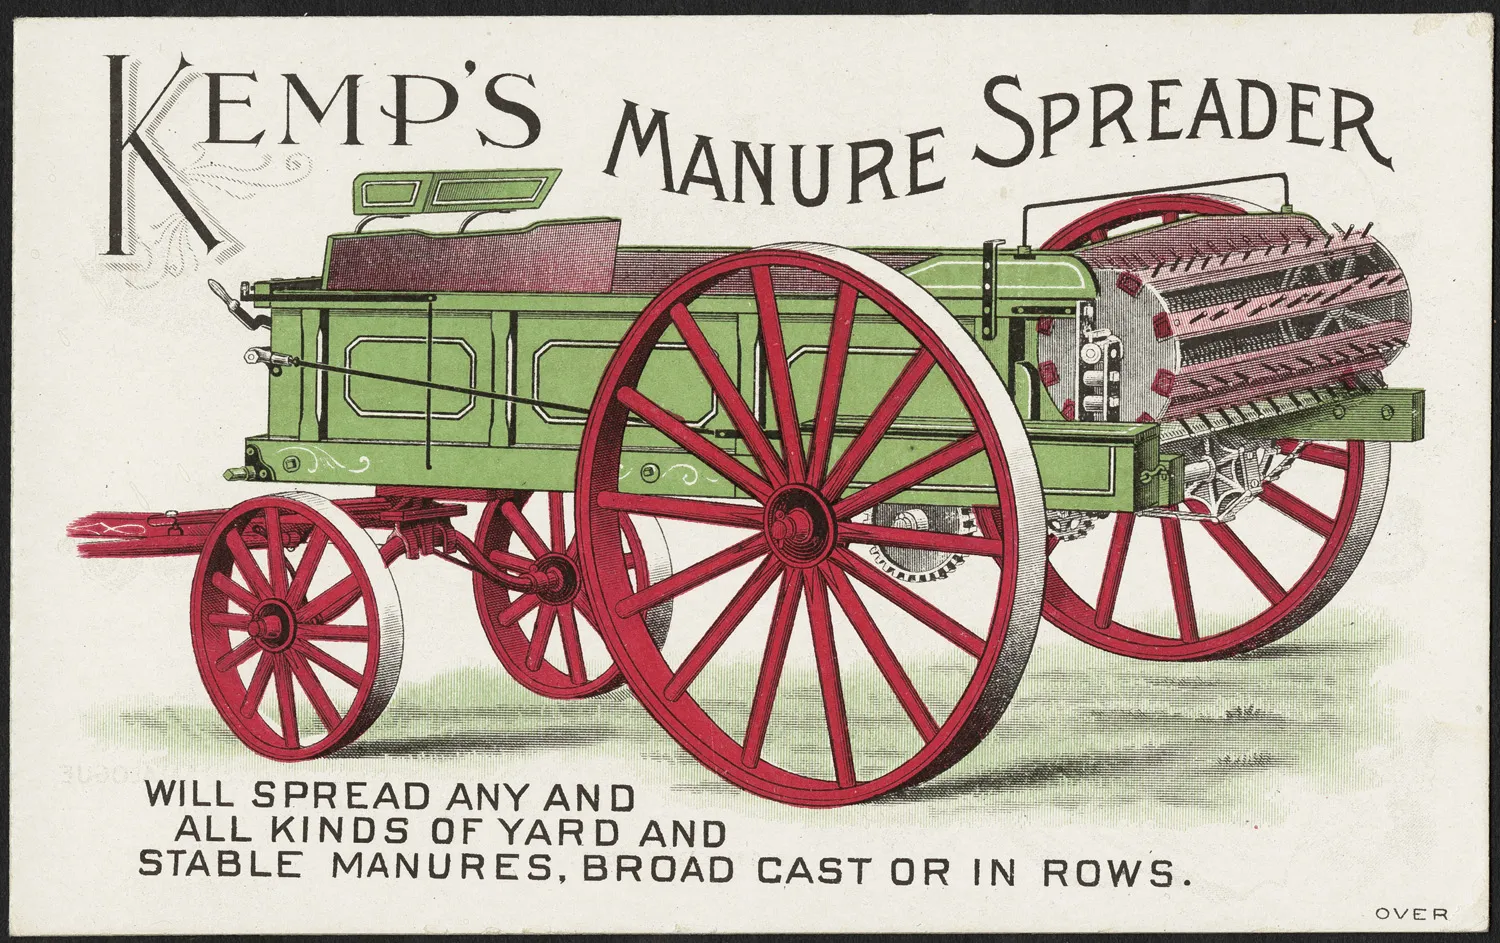 Photo showing: File name: 10_03_001605a
Binder label: Agriculture
Title: Kemp's Manure Spreader will spread any and all kinds of yard and stable manures. Broad cast or in rows. (front)
Date issued: 1870-1900 (approximate)
Physical description: 1 print : chromolithograph ; 8 x 13 cm.
Genre: Advertising cards
Subject: Agricultural equipment
Notes: Title from item.
Statement of responsibility: Kemp & Burpee M'f'g Co. 
Collection: 19th Century American Trade Cards
Location: Boston Public Library, Print Department

Rights: No known restrictions.